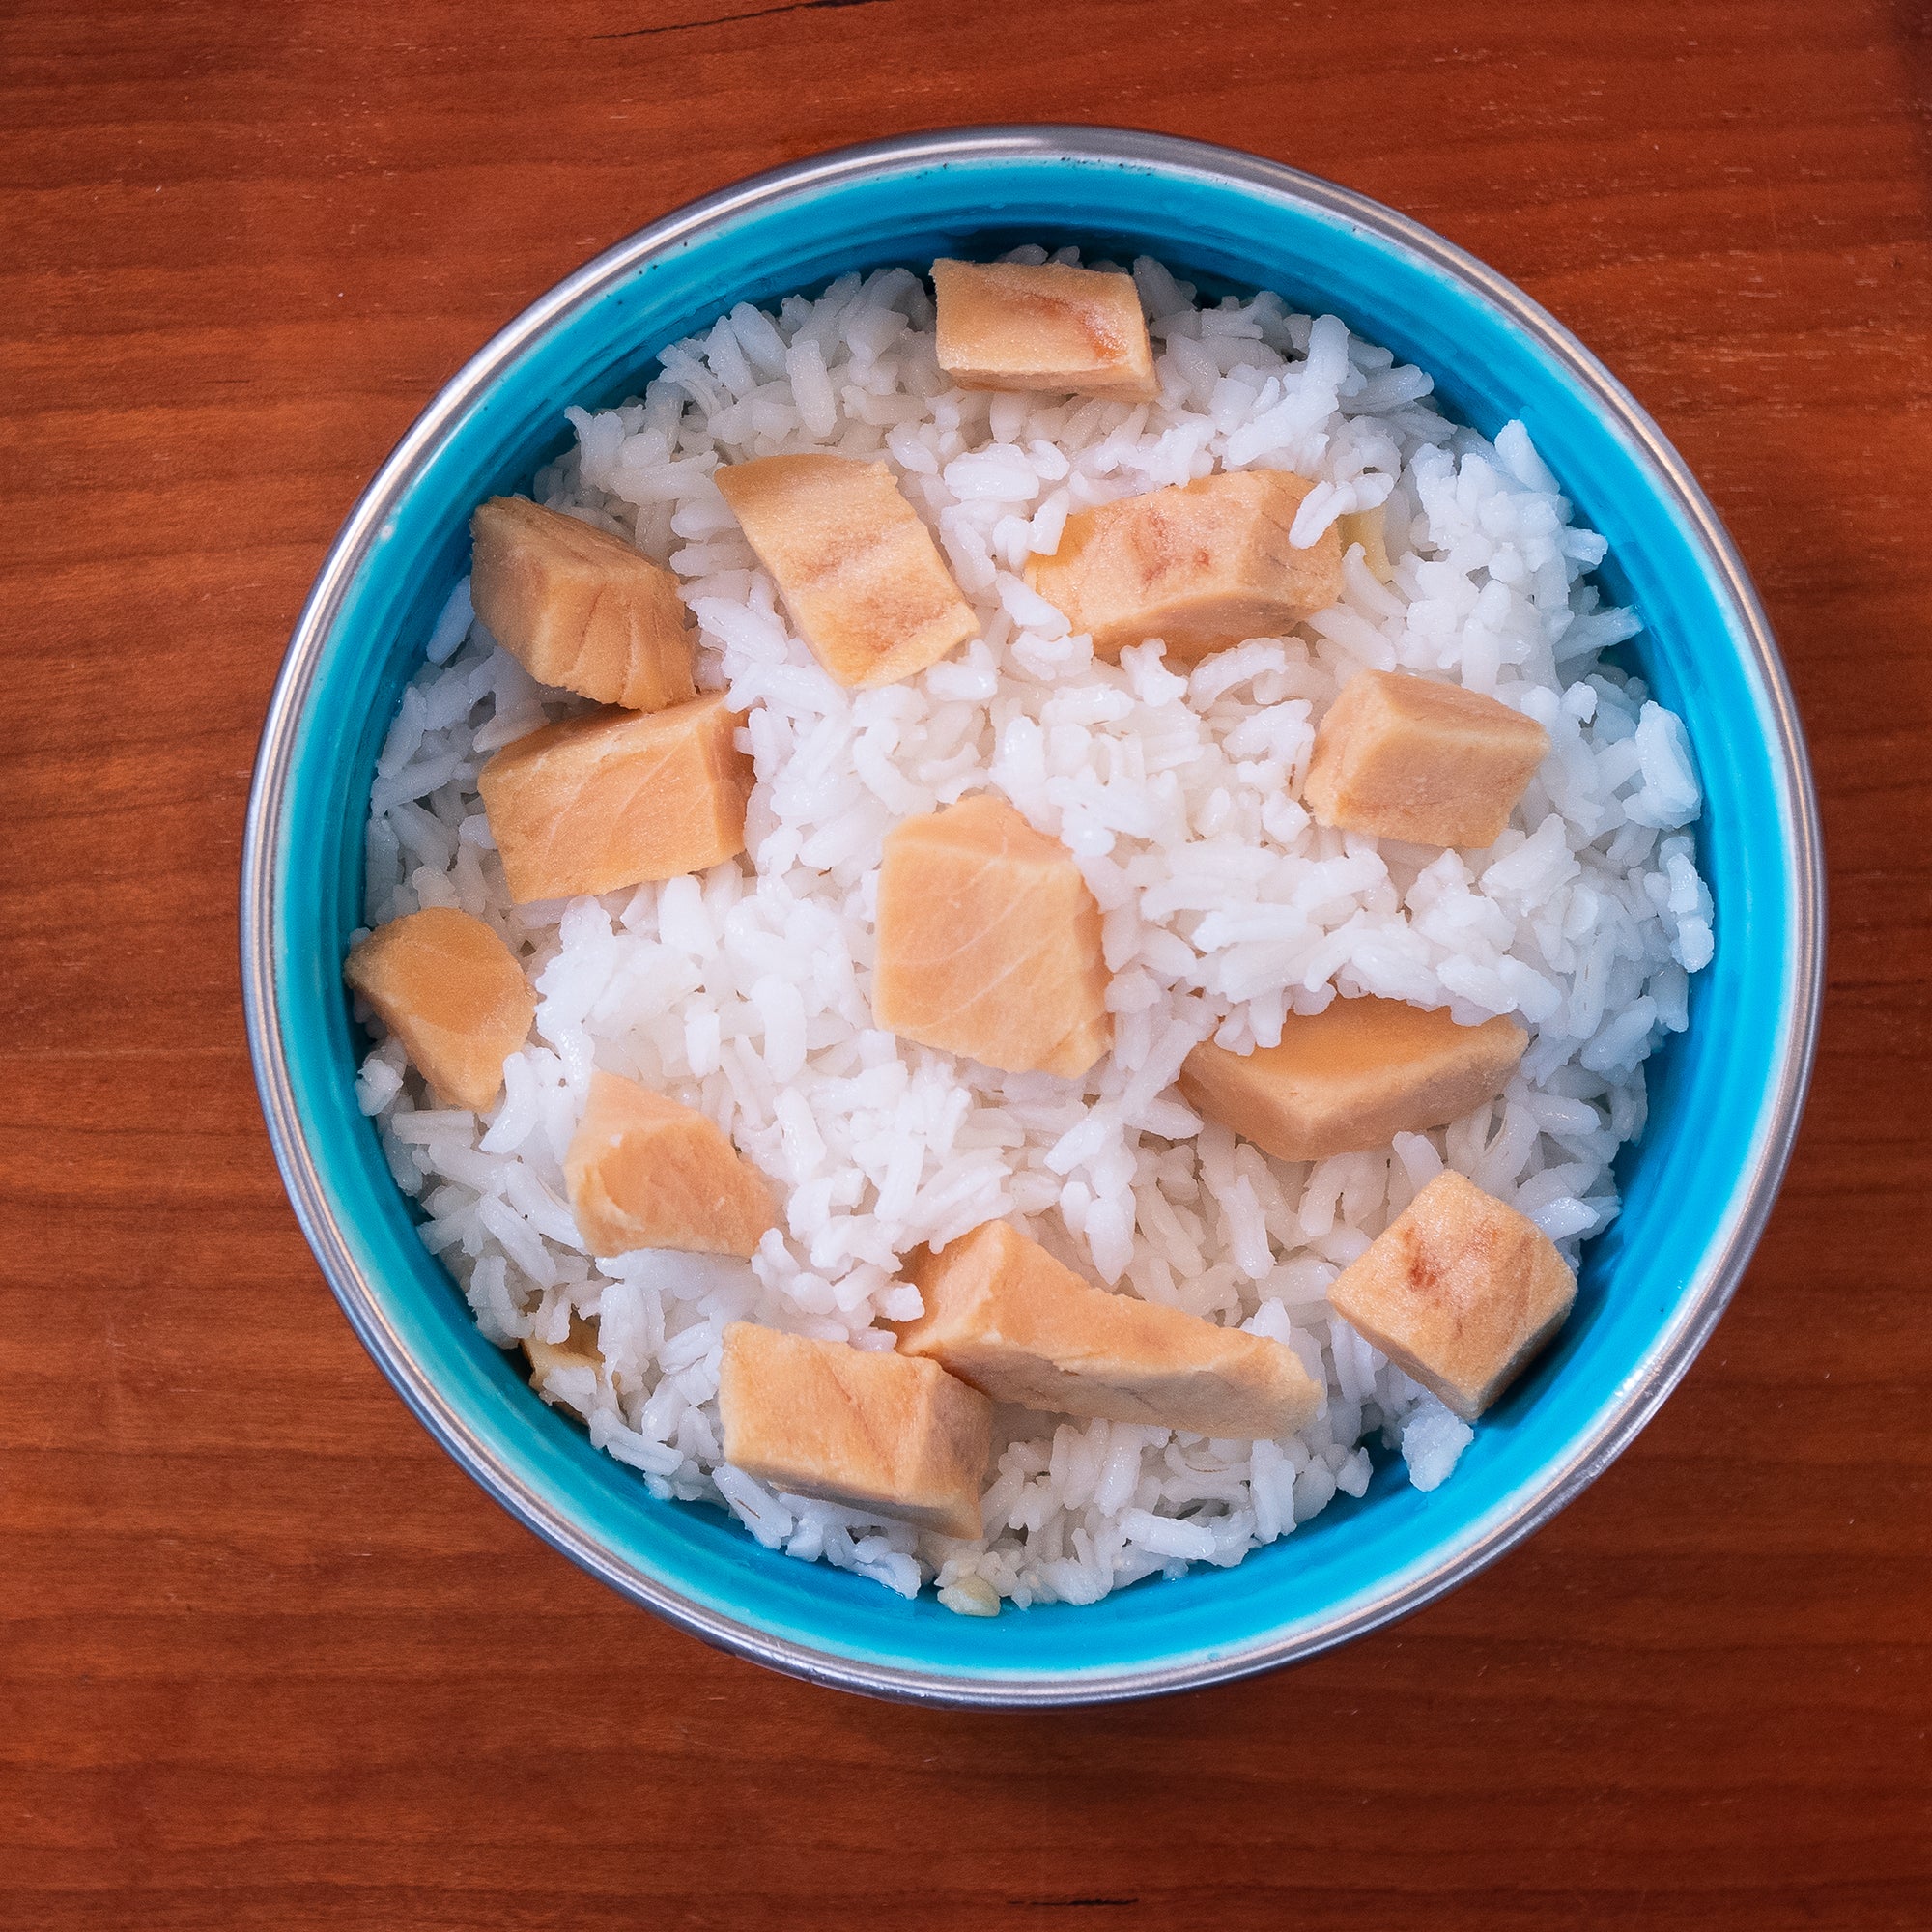 Salmon & Rice Bland Diet For Dogs - 6 pack